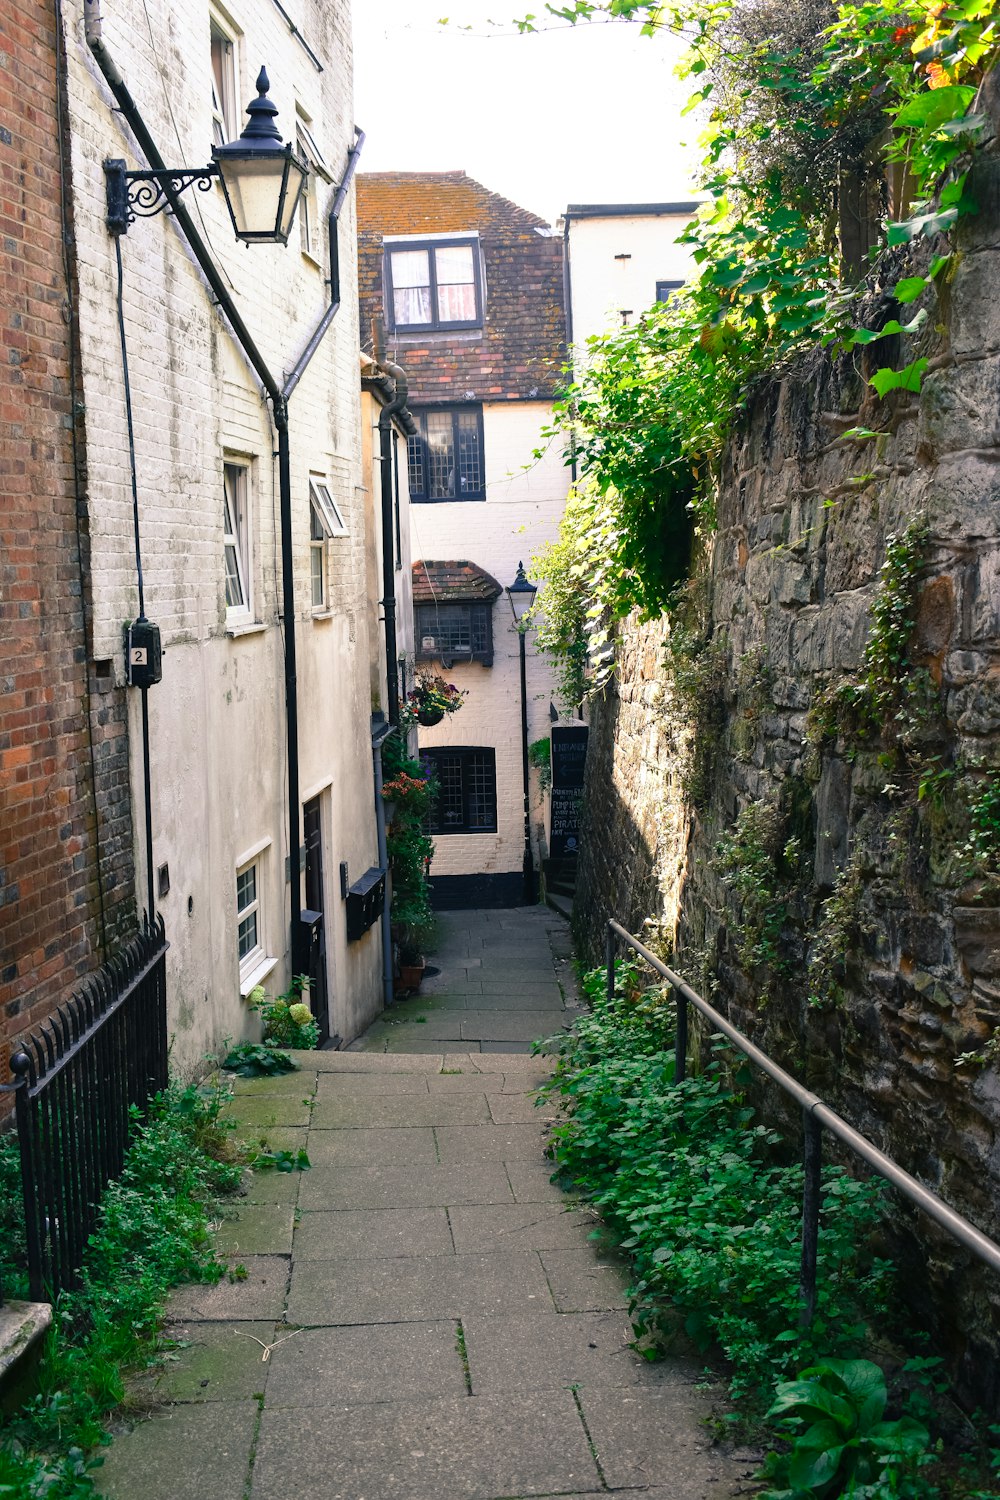 a narrow alley way with a lamp post on the side